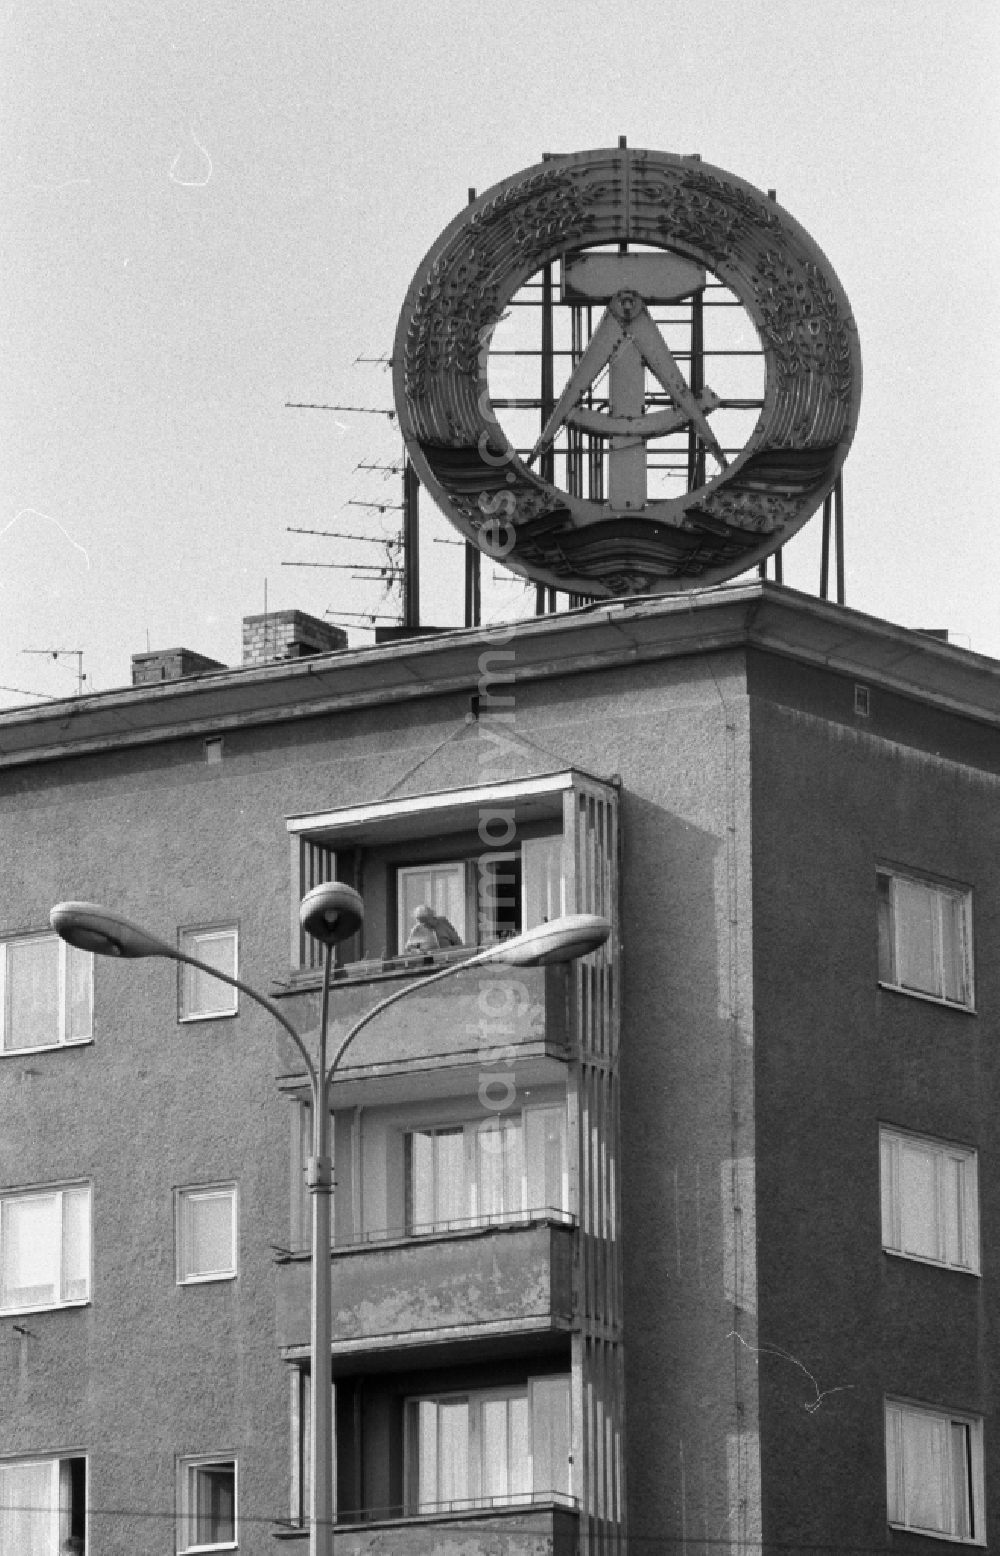 GDR image archive: Berlin - Emblem und Symbol- Kennzeichen on the roof of a house in the district Friedrichshain in Berlin Eastberlin on the territory of the former GDR, German Democratic Republic